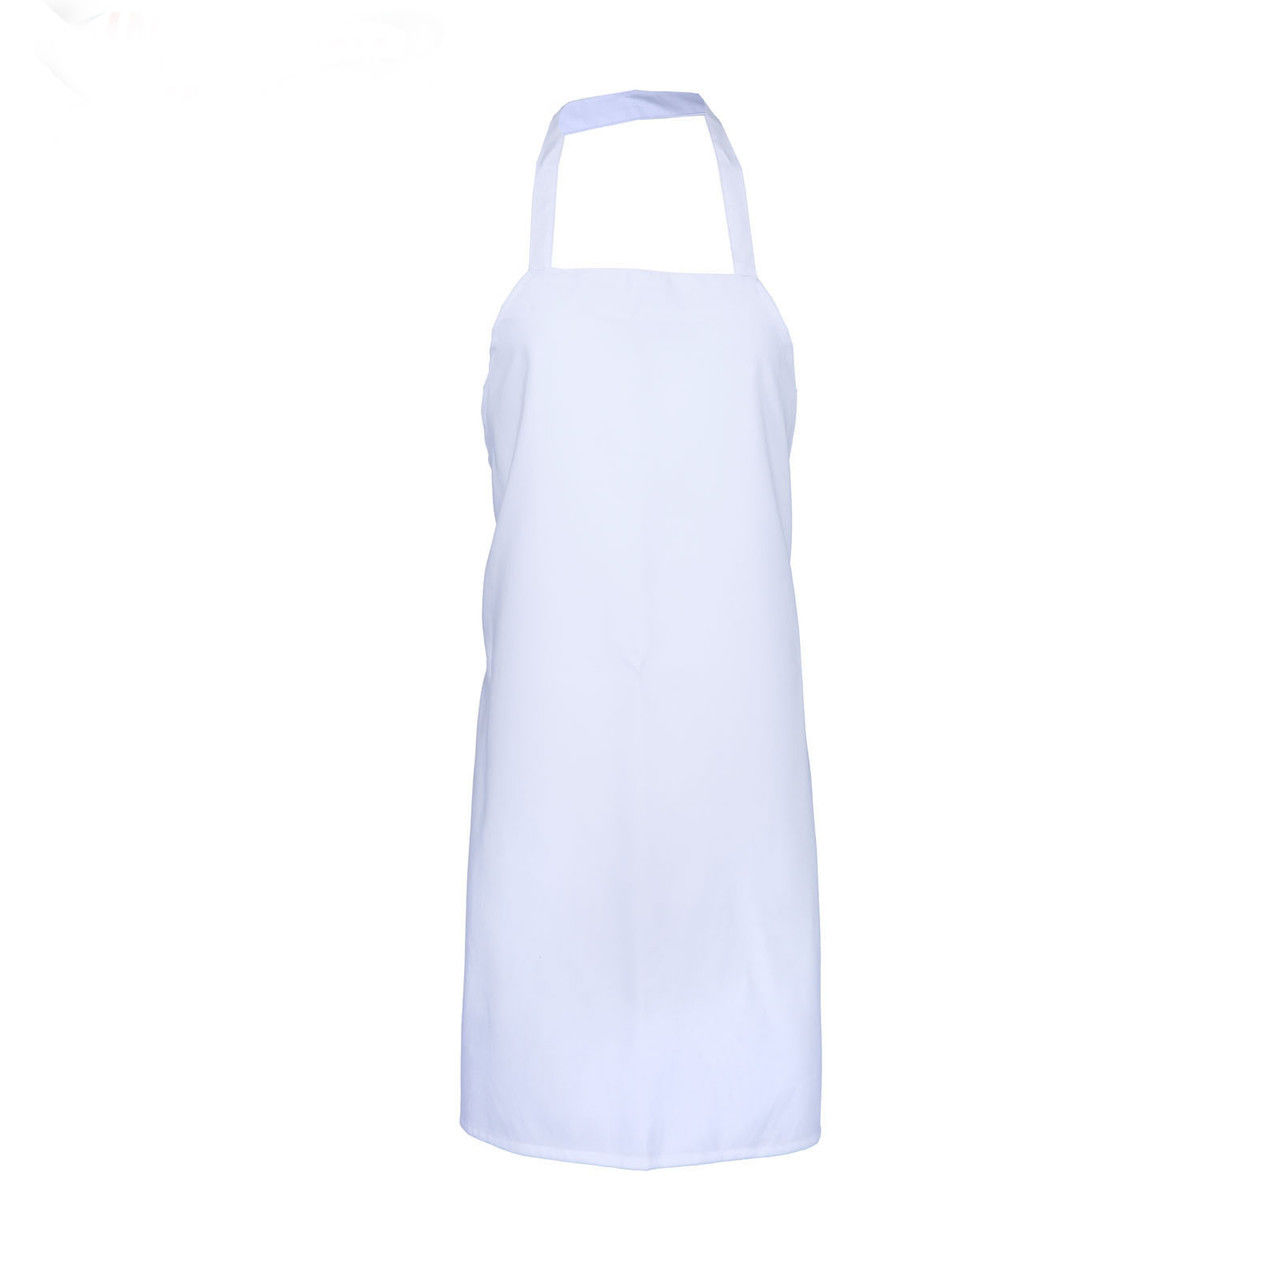 What is the difference between a bib apron and an apron?